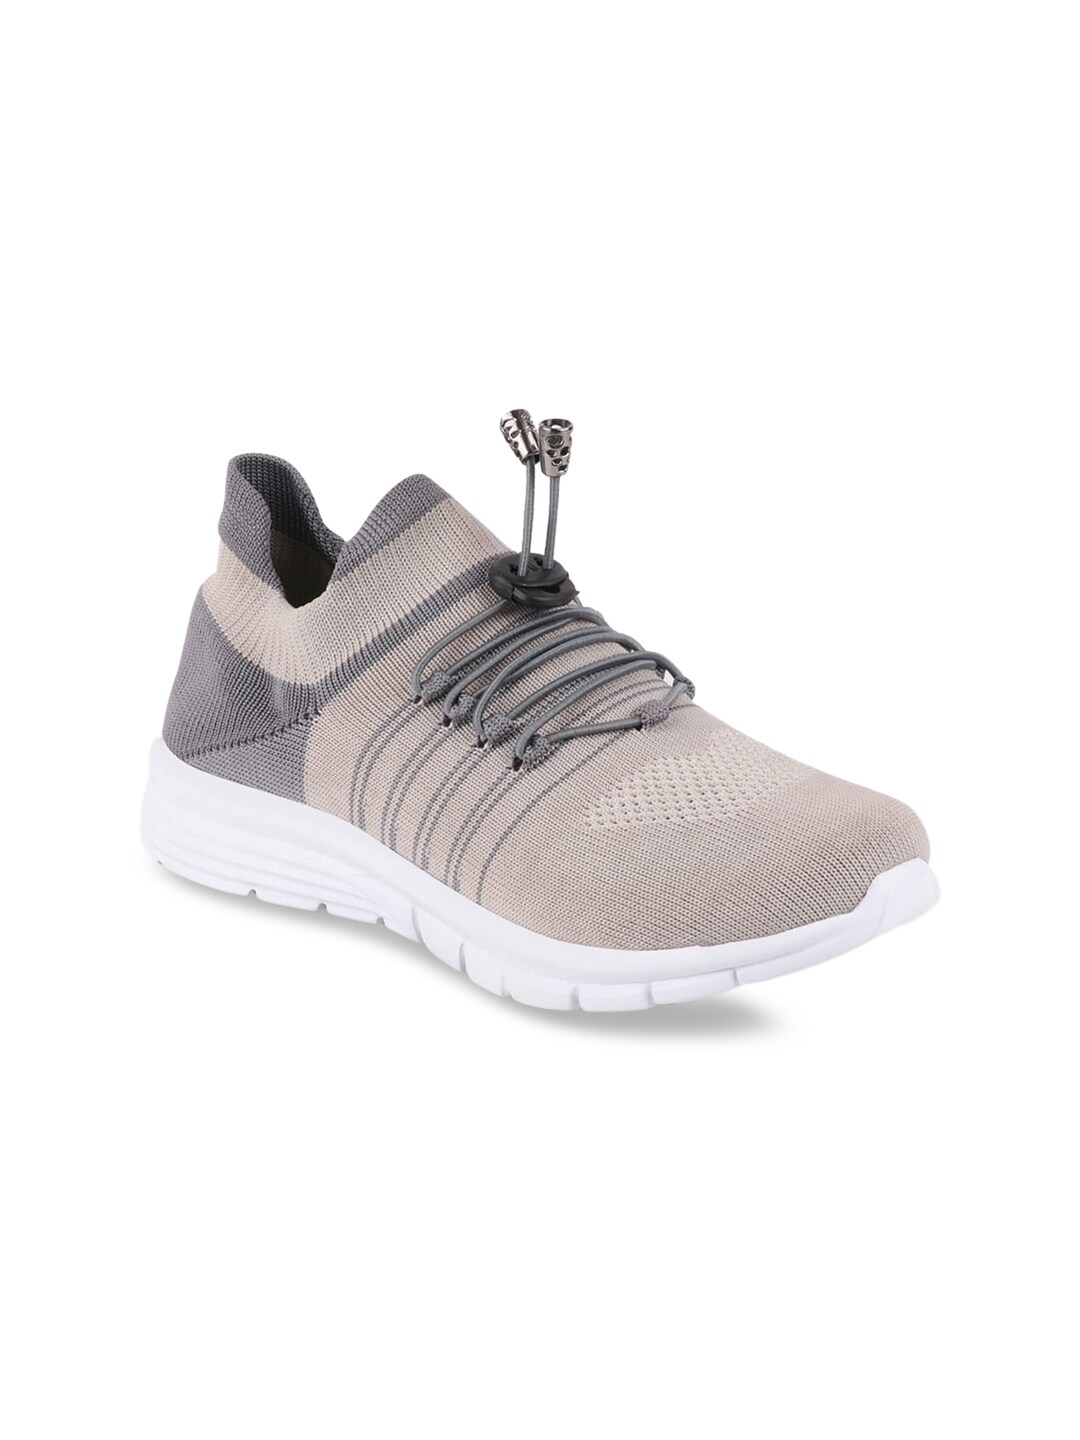 FAUSTO Women Cream-Coloured & Grey Running Shoes Price in India